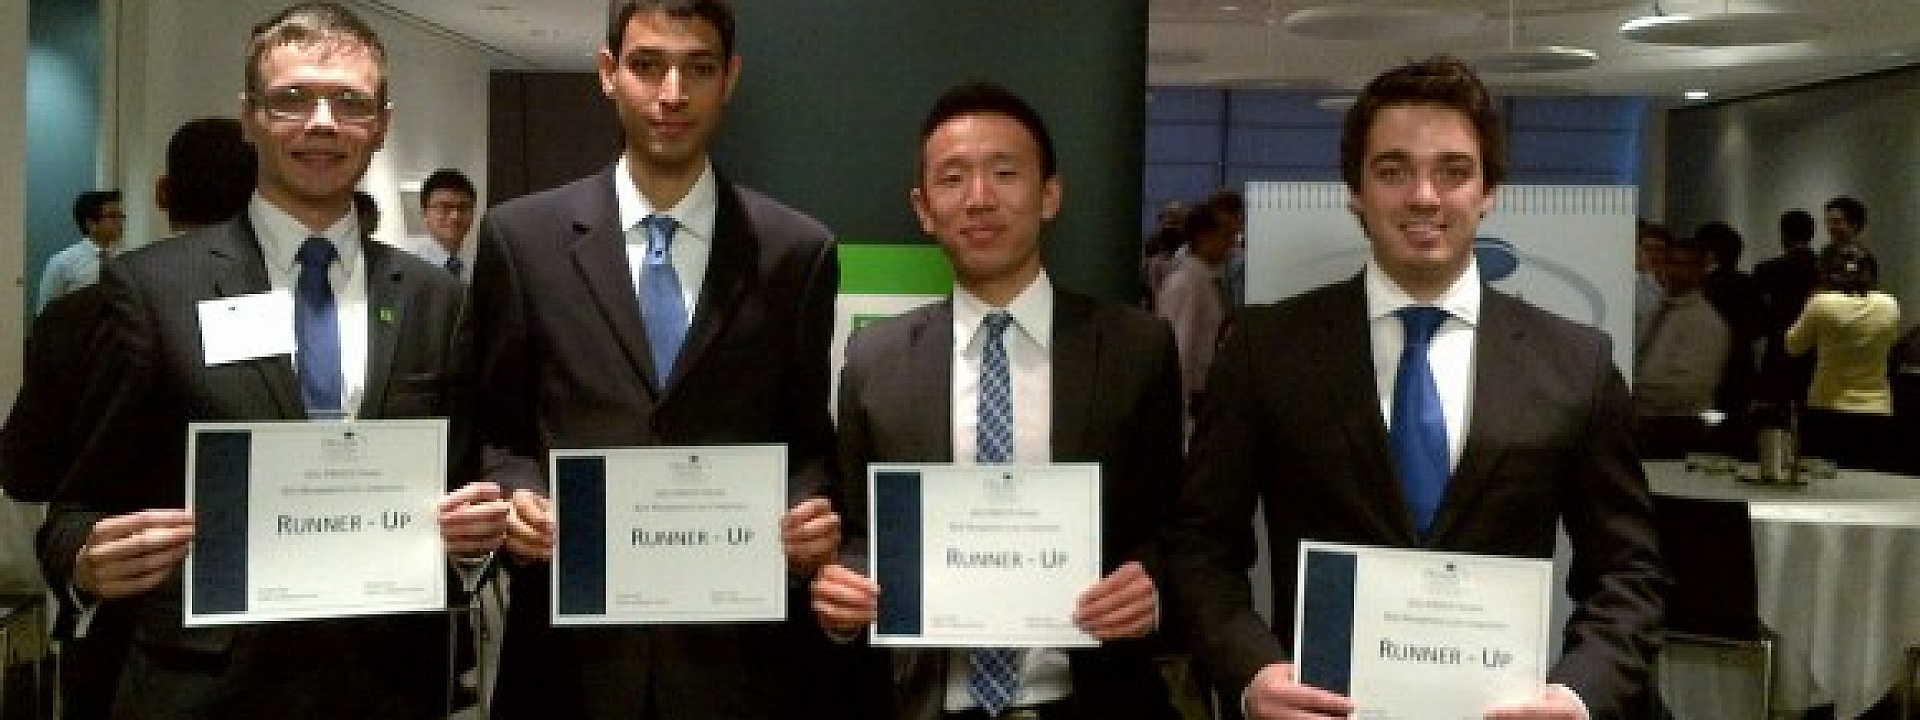 Telfer Students Win 2nd Place at PRMIA Financial Risk Management Competition